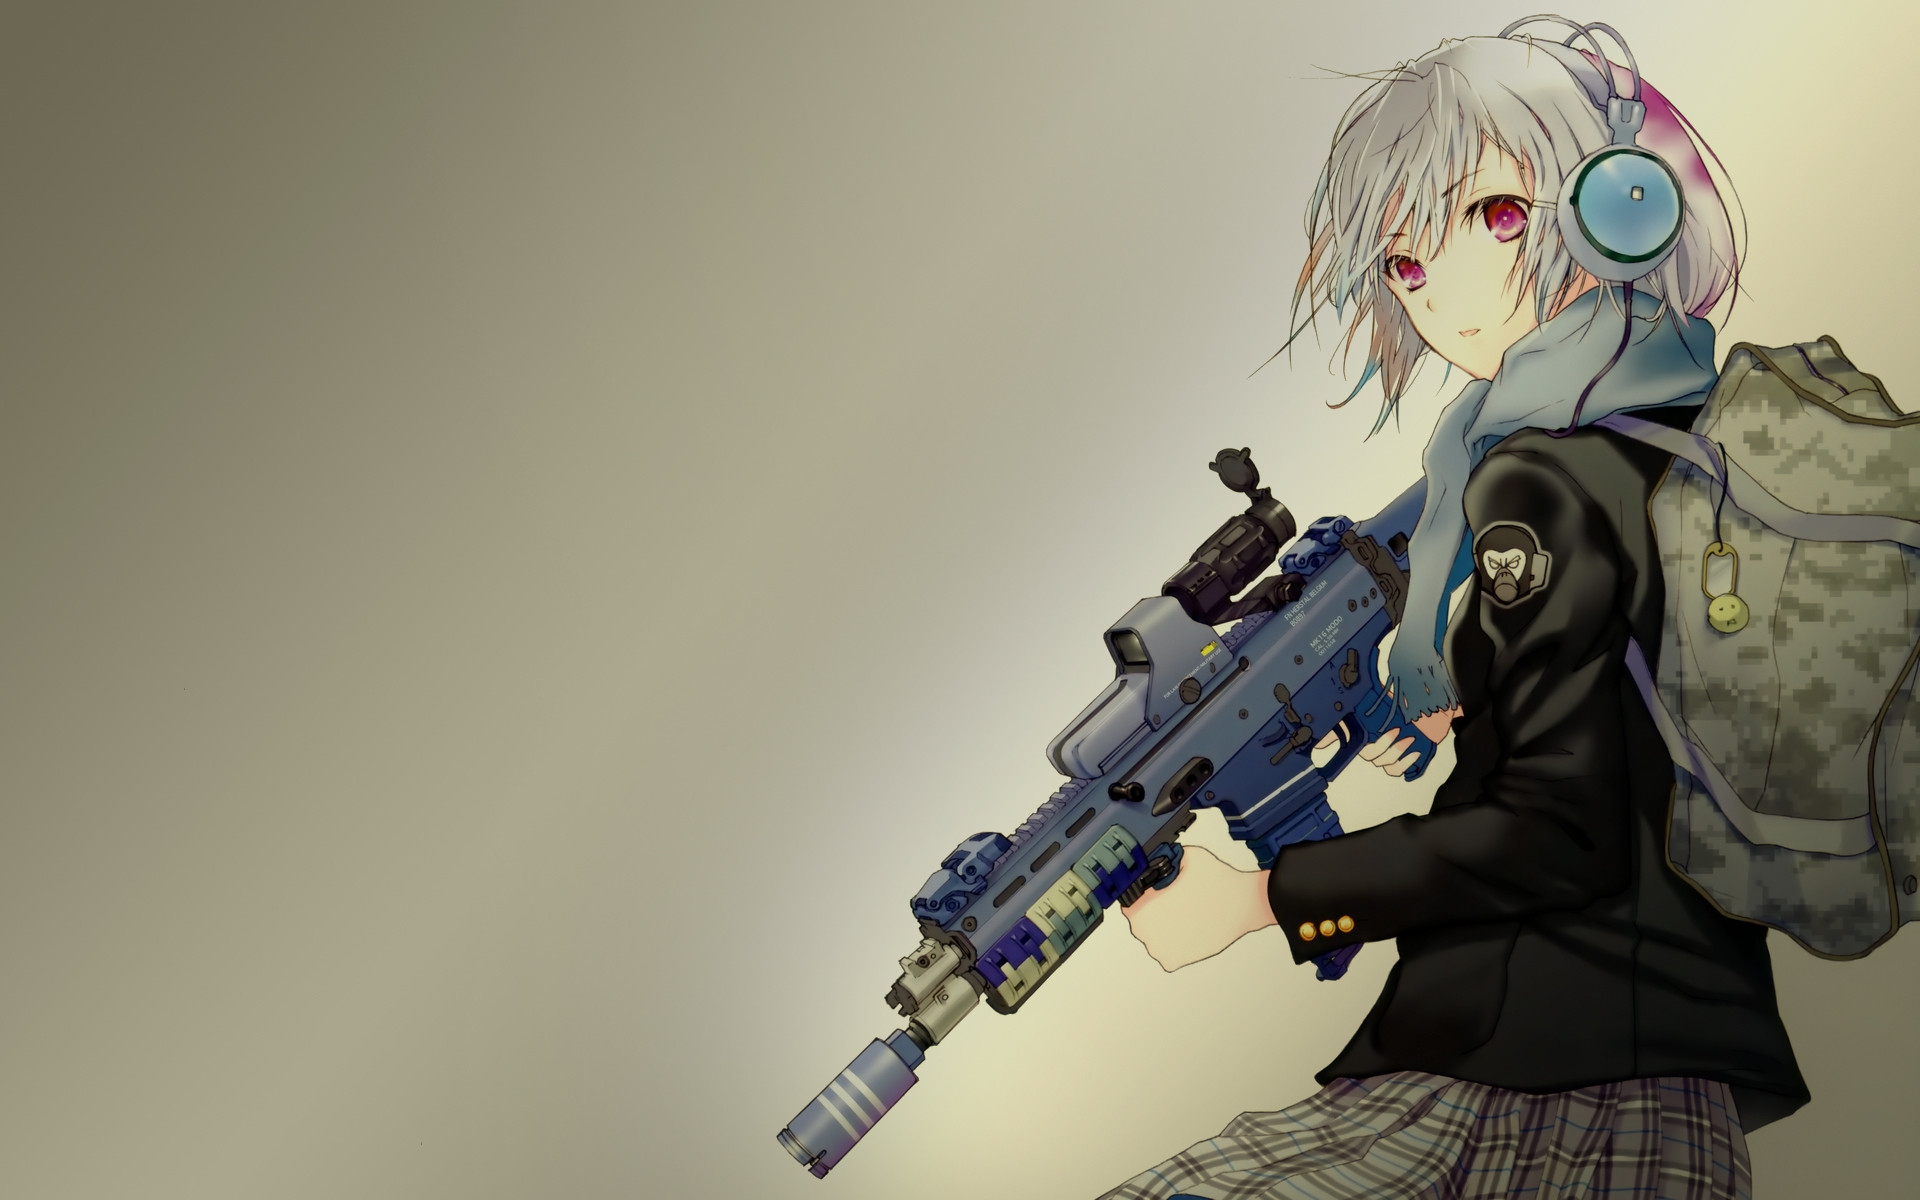 Free download Anime shooter [1920x1200] not made by me iimgurcom  [1920x1200] for your Desktop, Mobile & Tablet | Explore 49+ Reddit Anime  Wallpaper Dump | Reddit Anime Wallpaper, Imgur Wallpaper Dump, Wallpaper  Dump